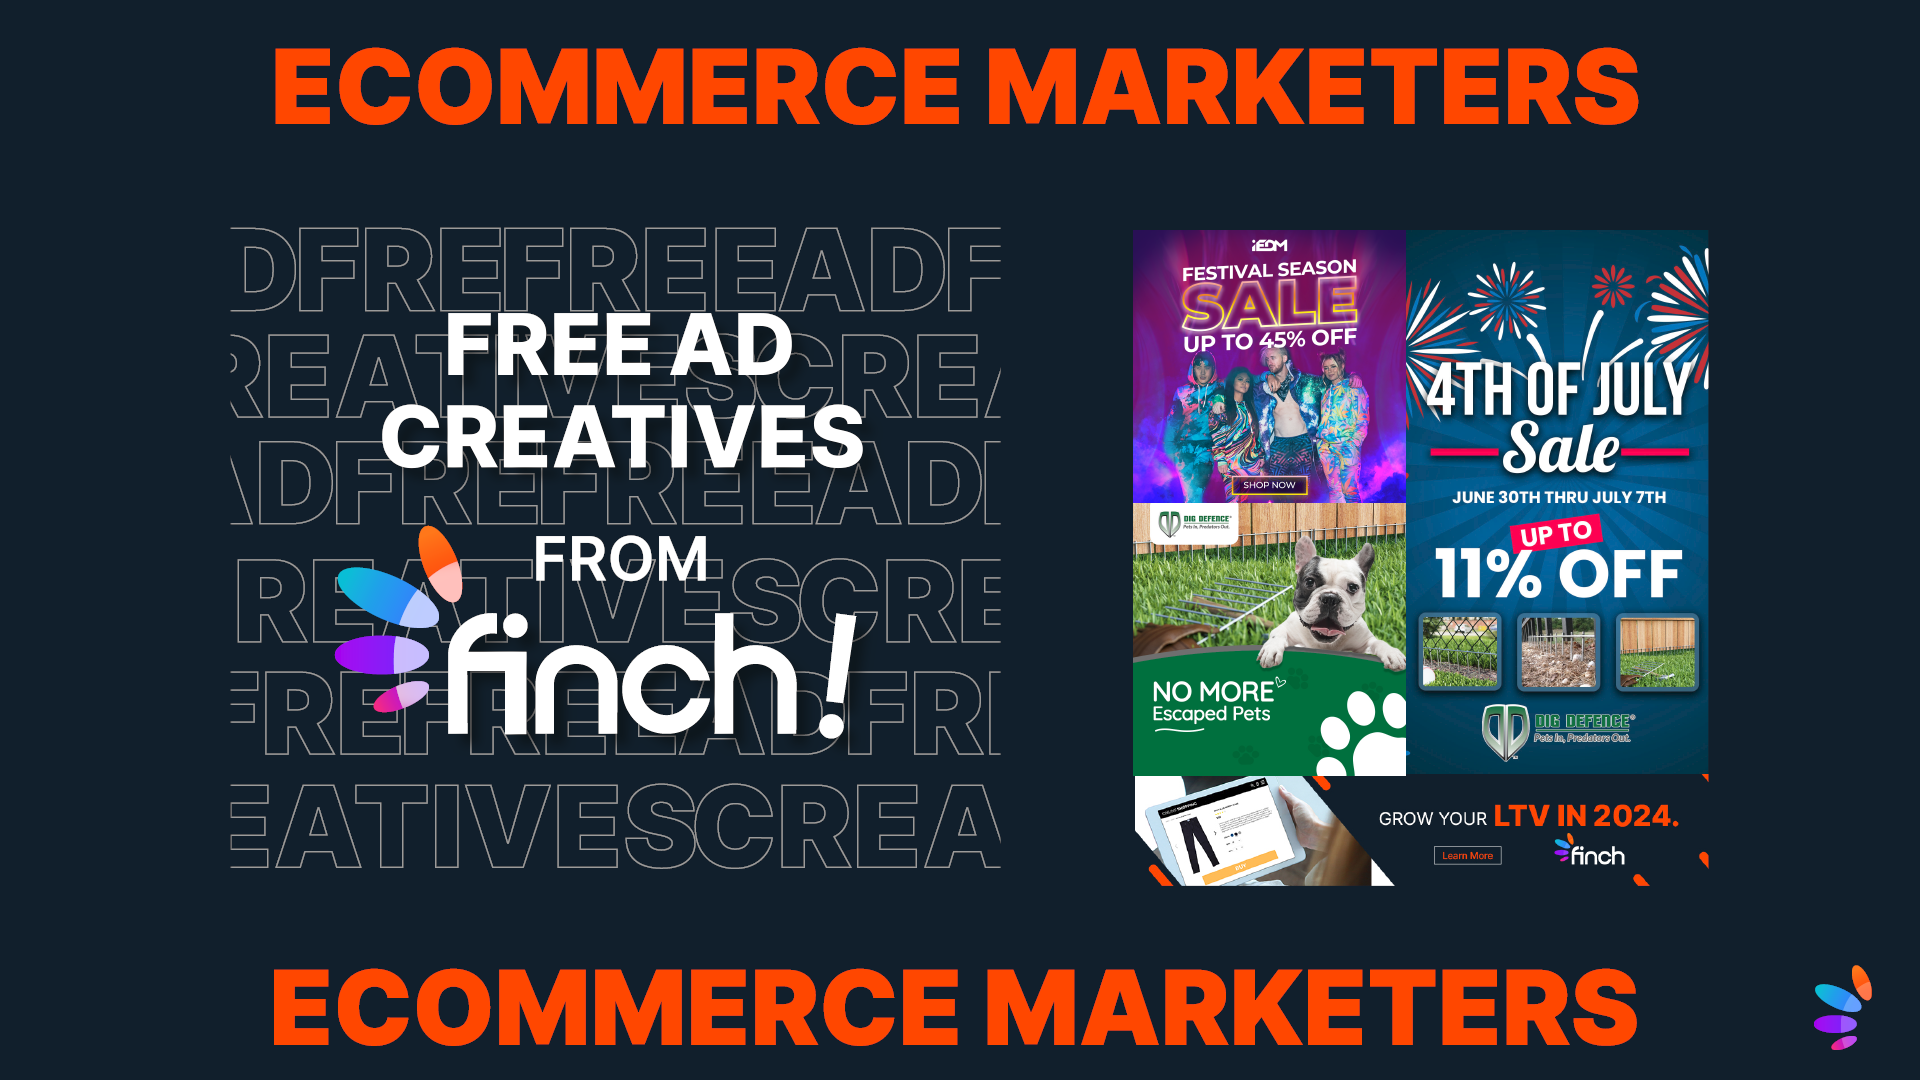 Free Ad Creative Officer From Finch